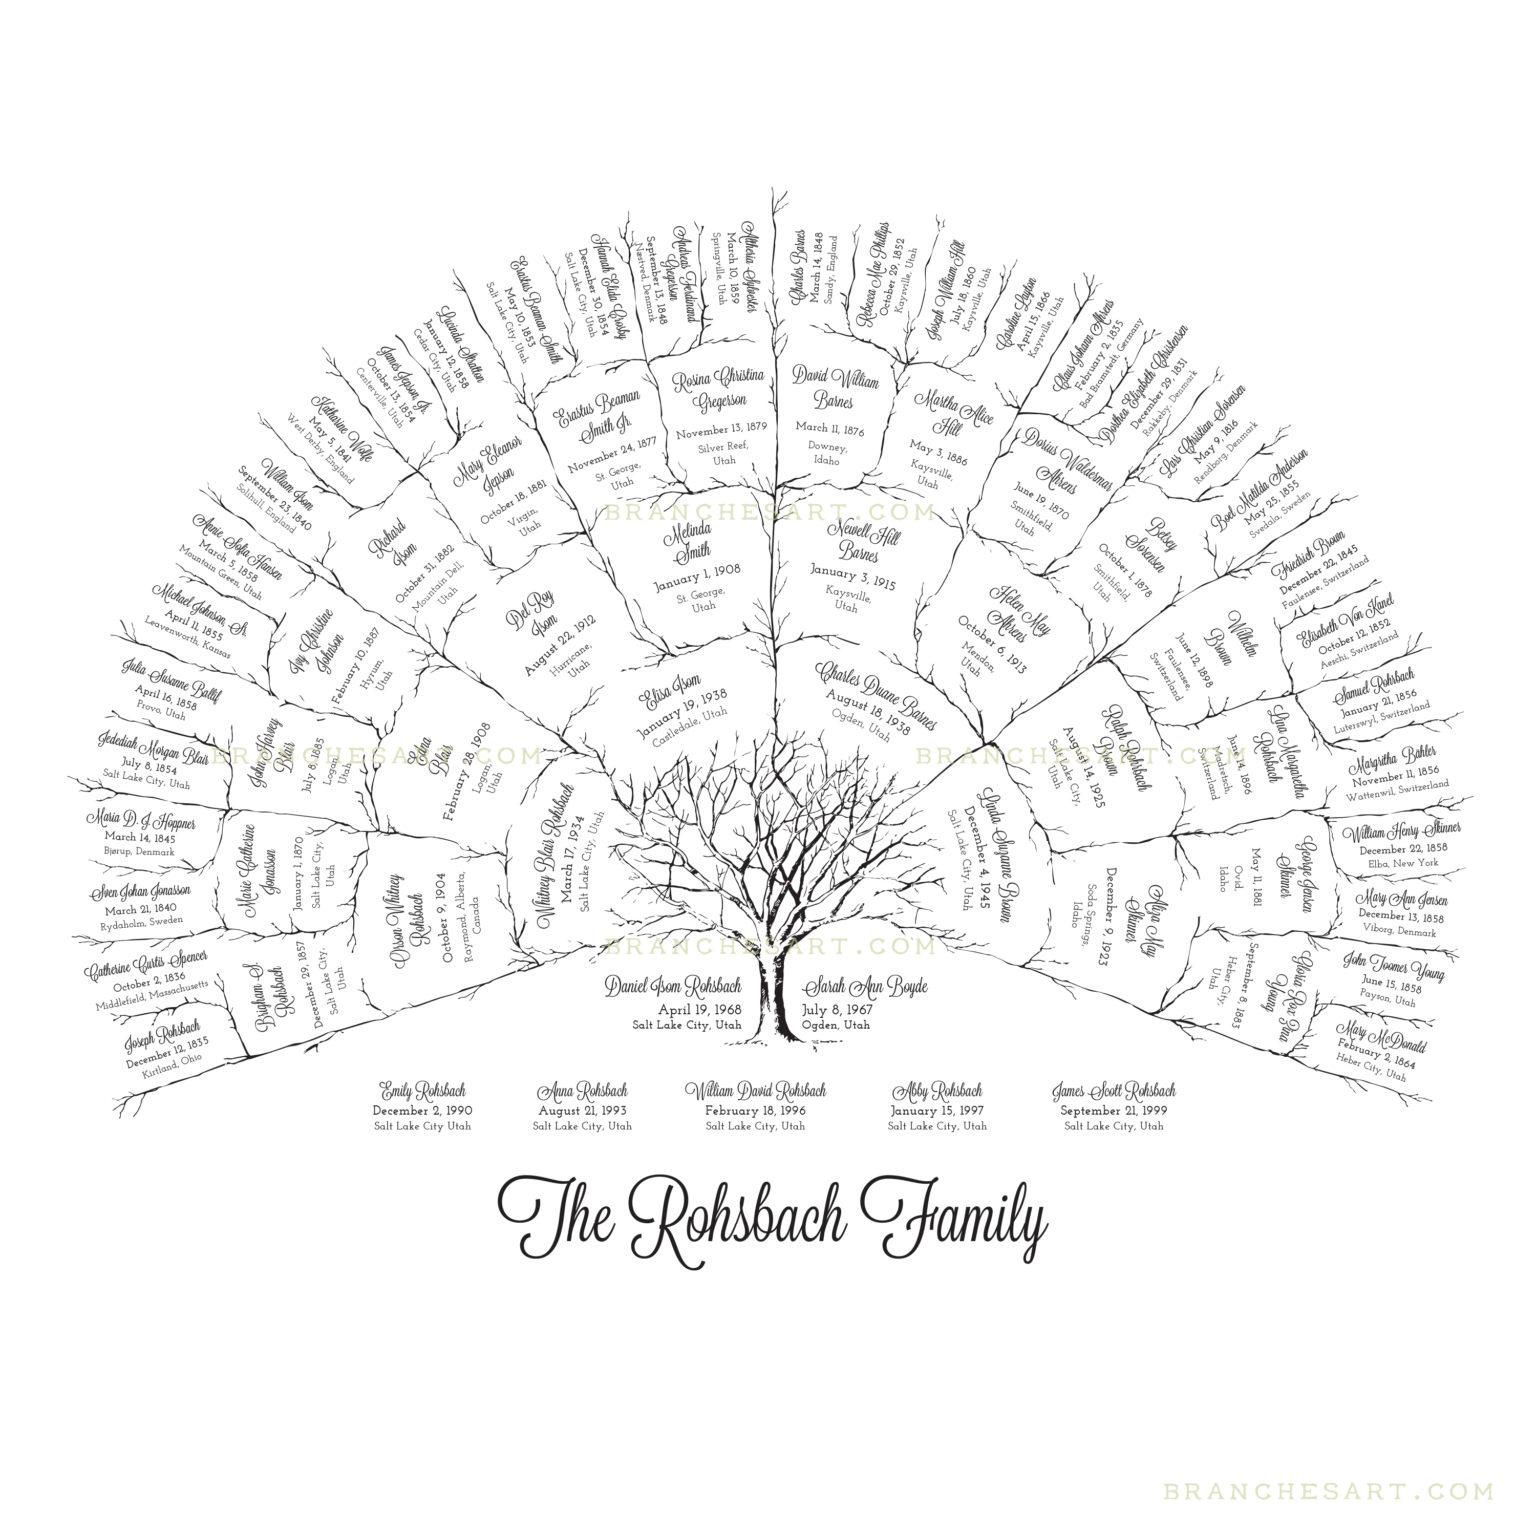 Ancestor Family Trees Archives - Branches